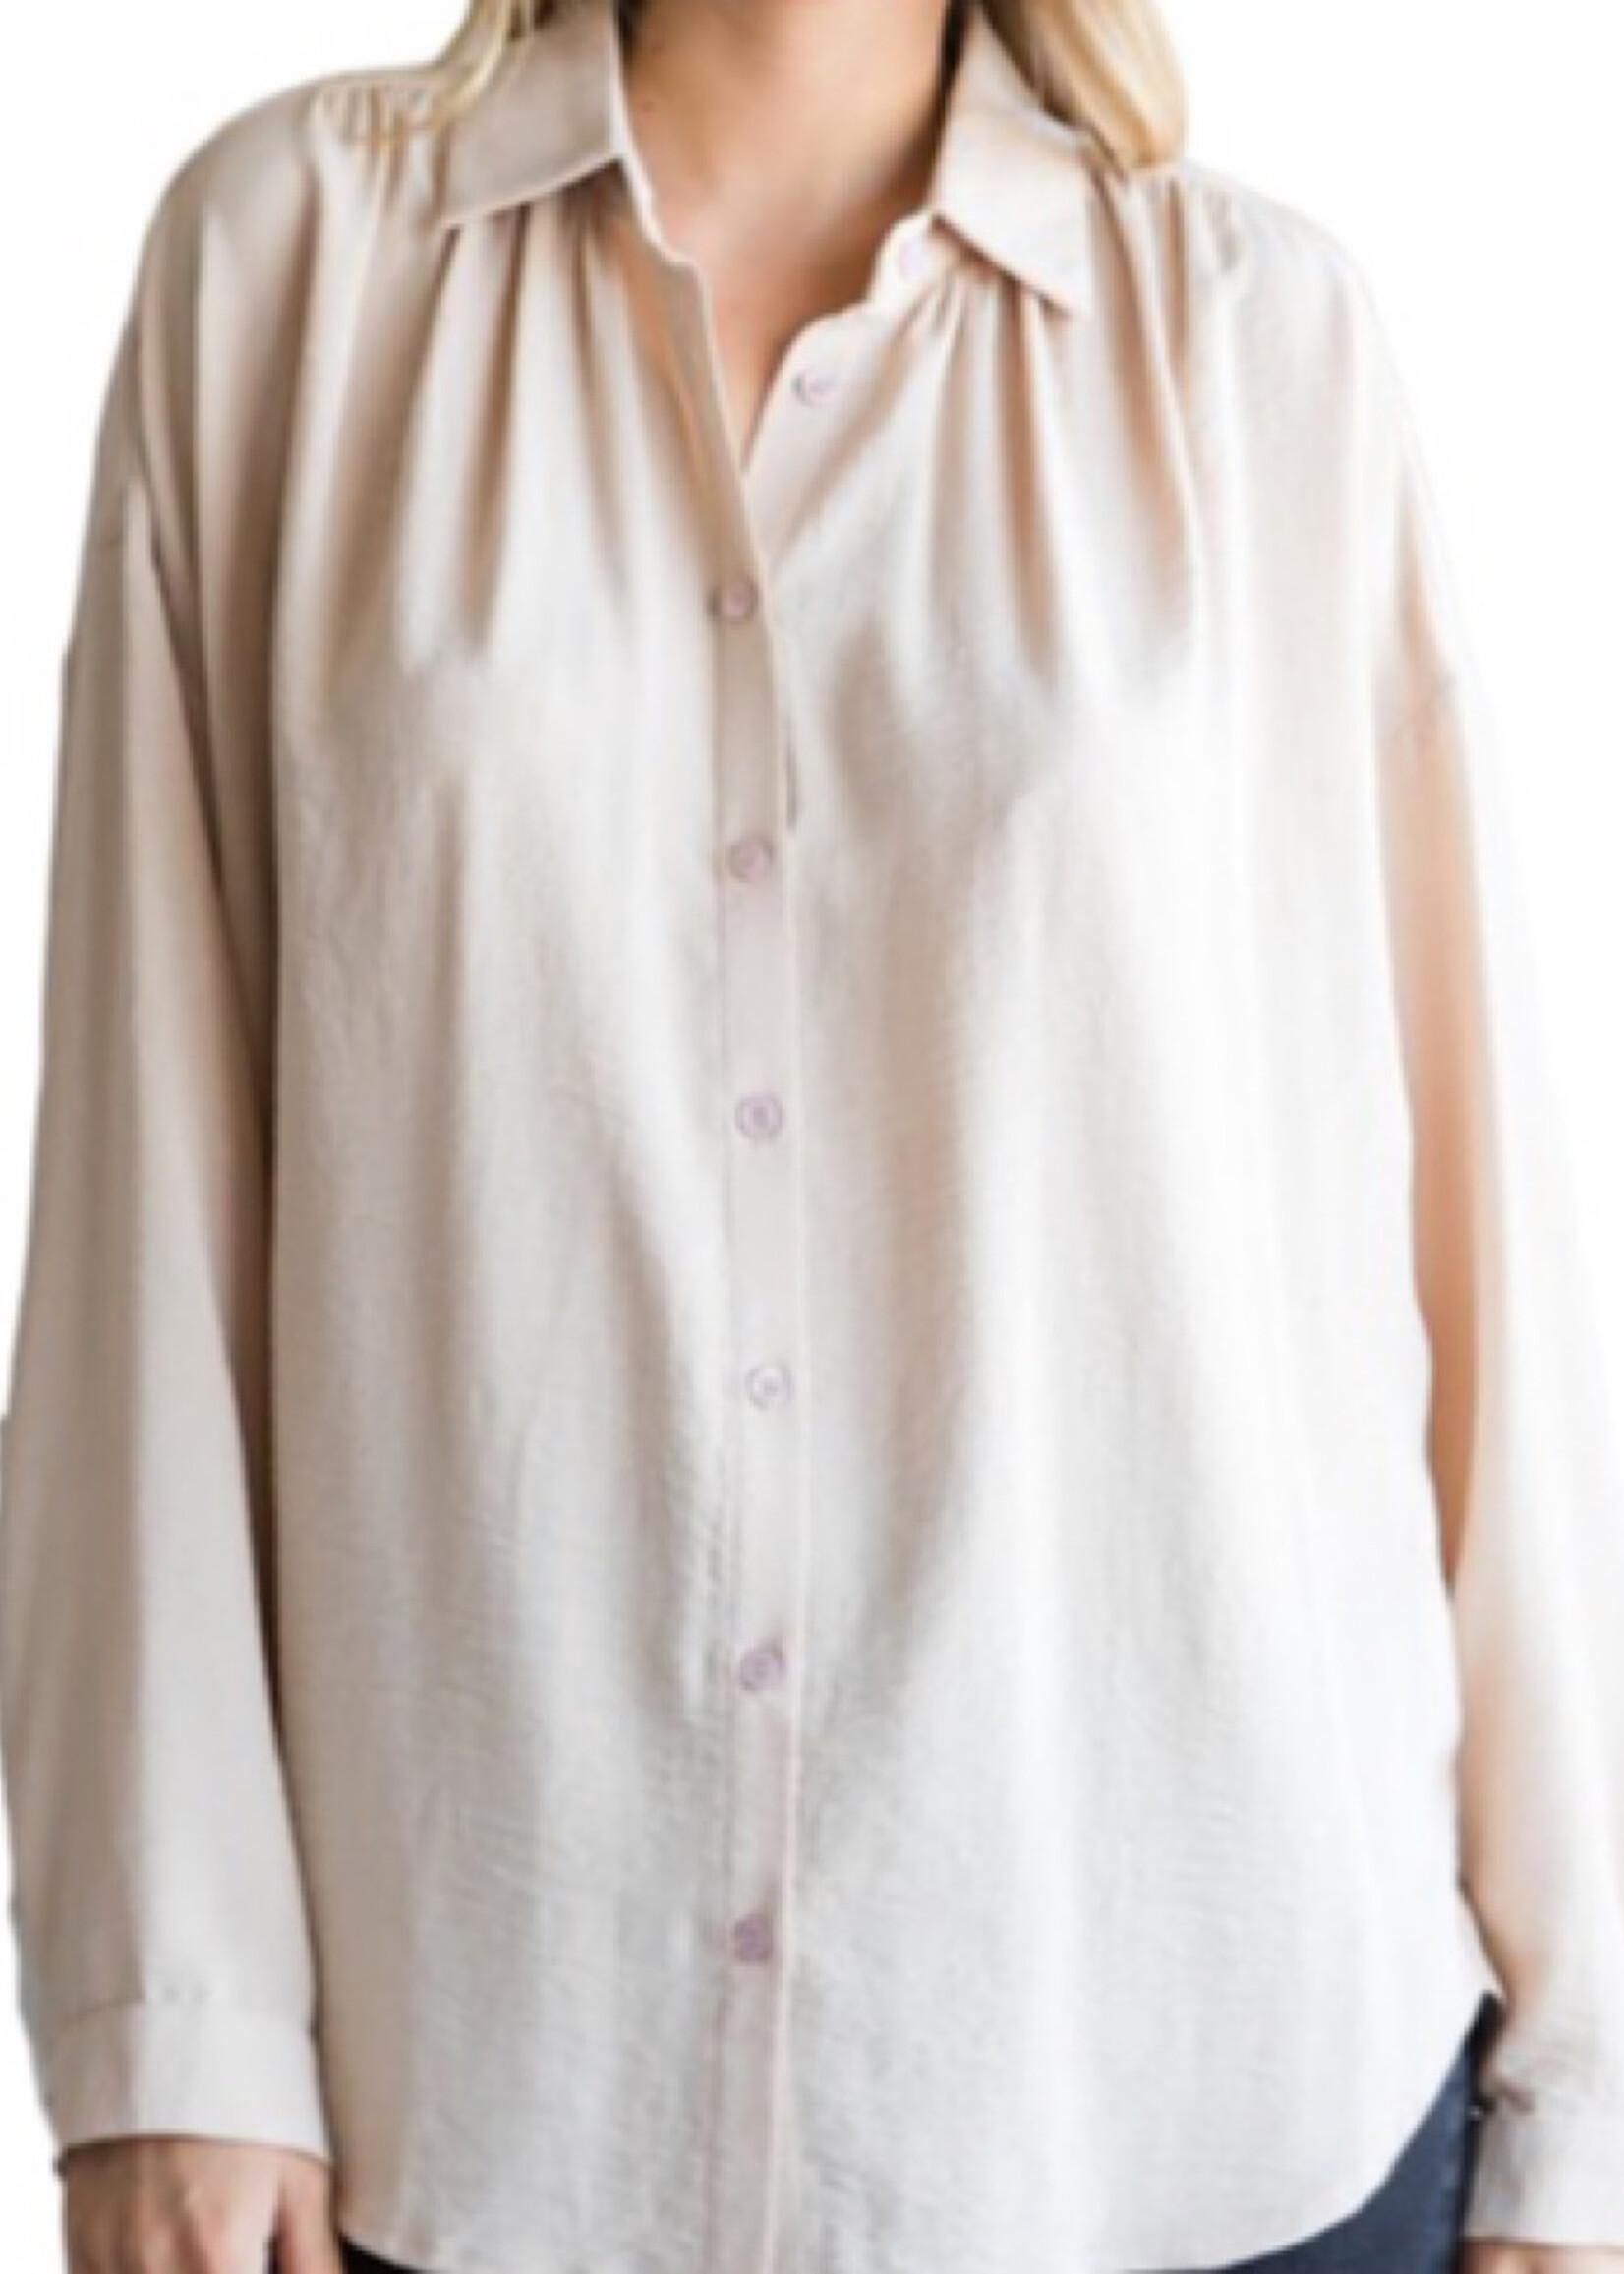 Solid Button Up Long Sleeve Tops